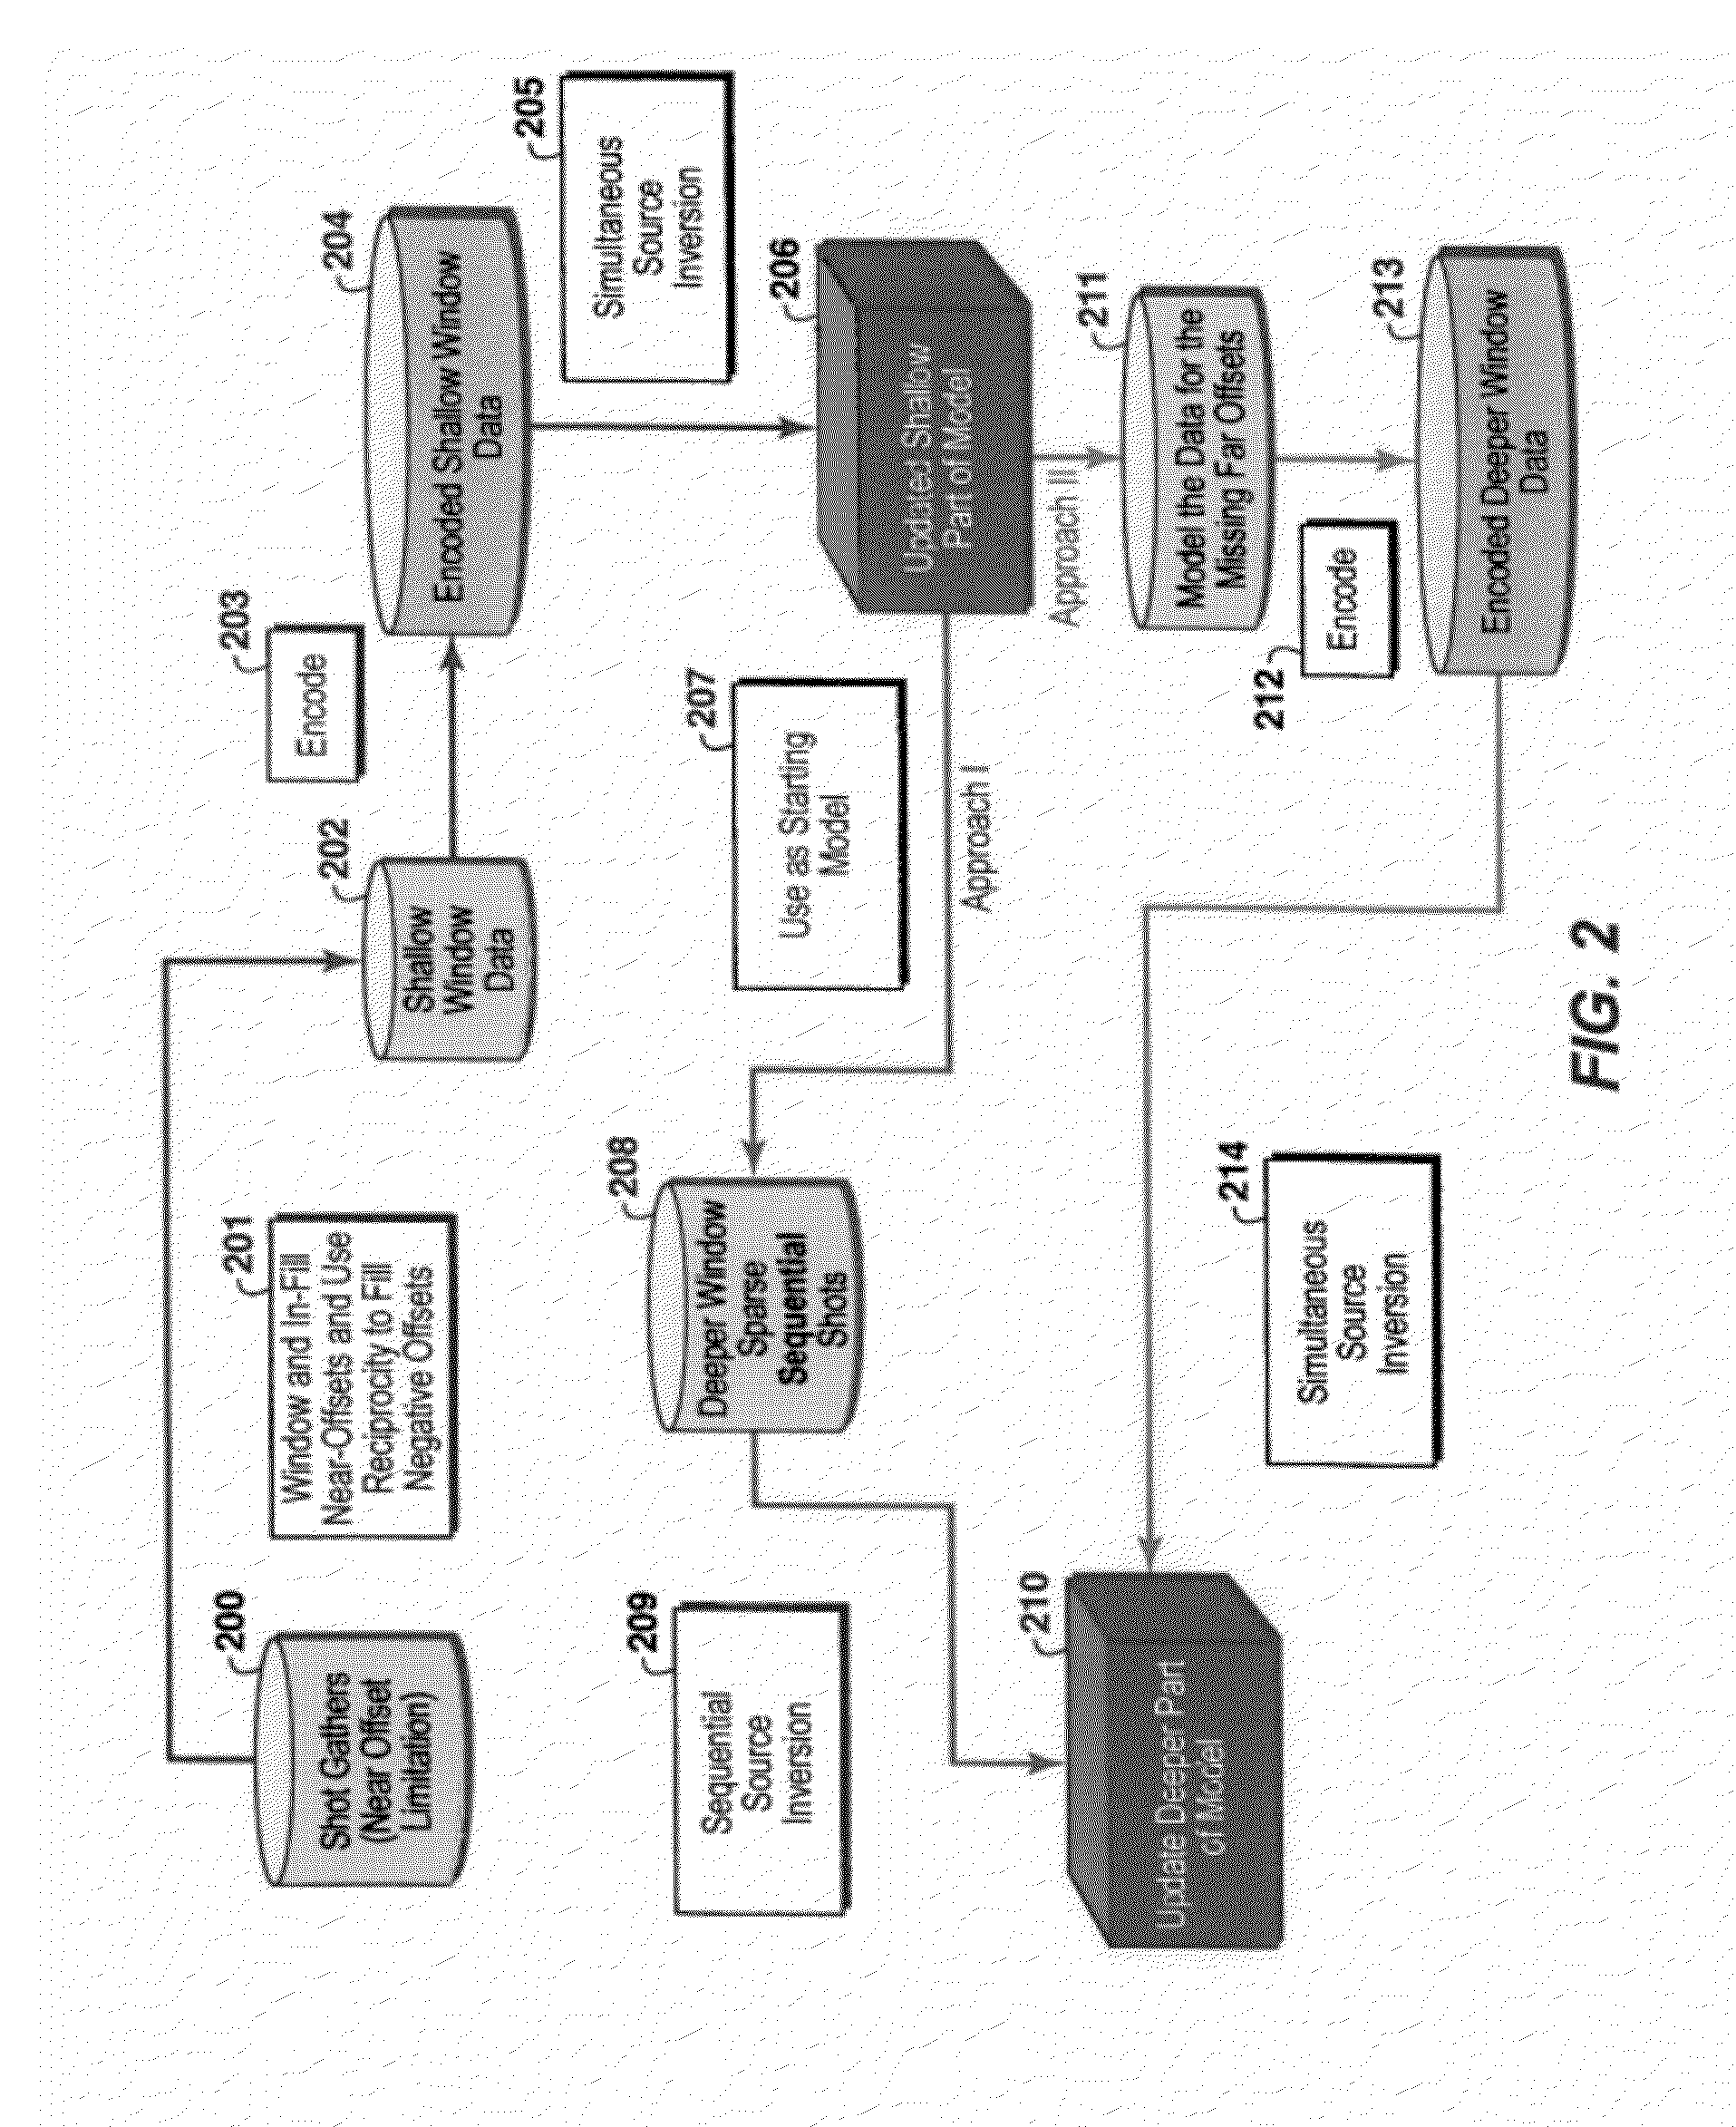 Hybride Method For Full Waveform Inversion Using Simultaneous and Sequential Source Method